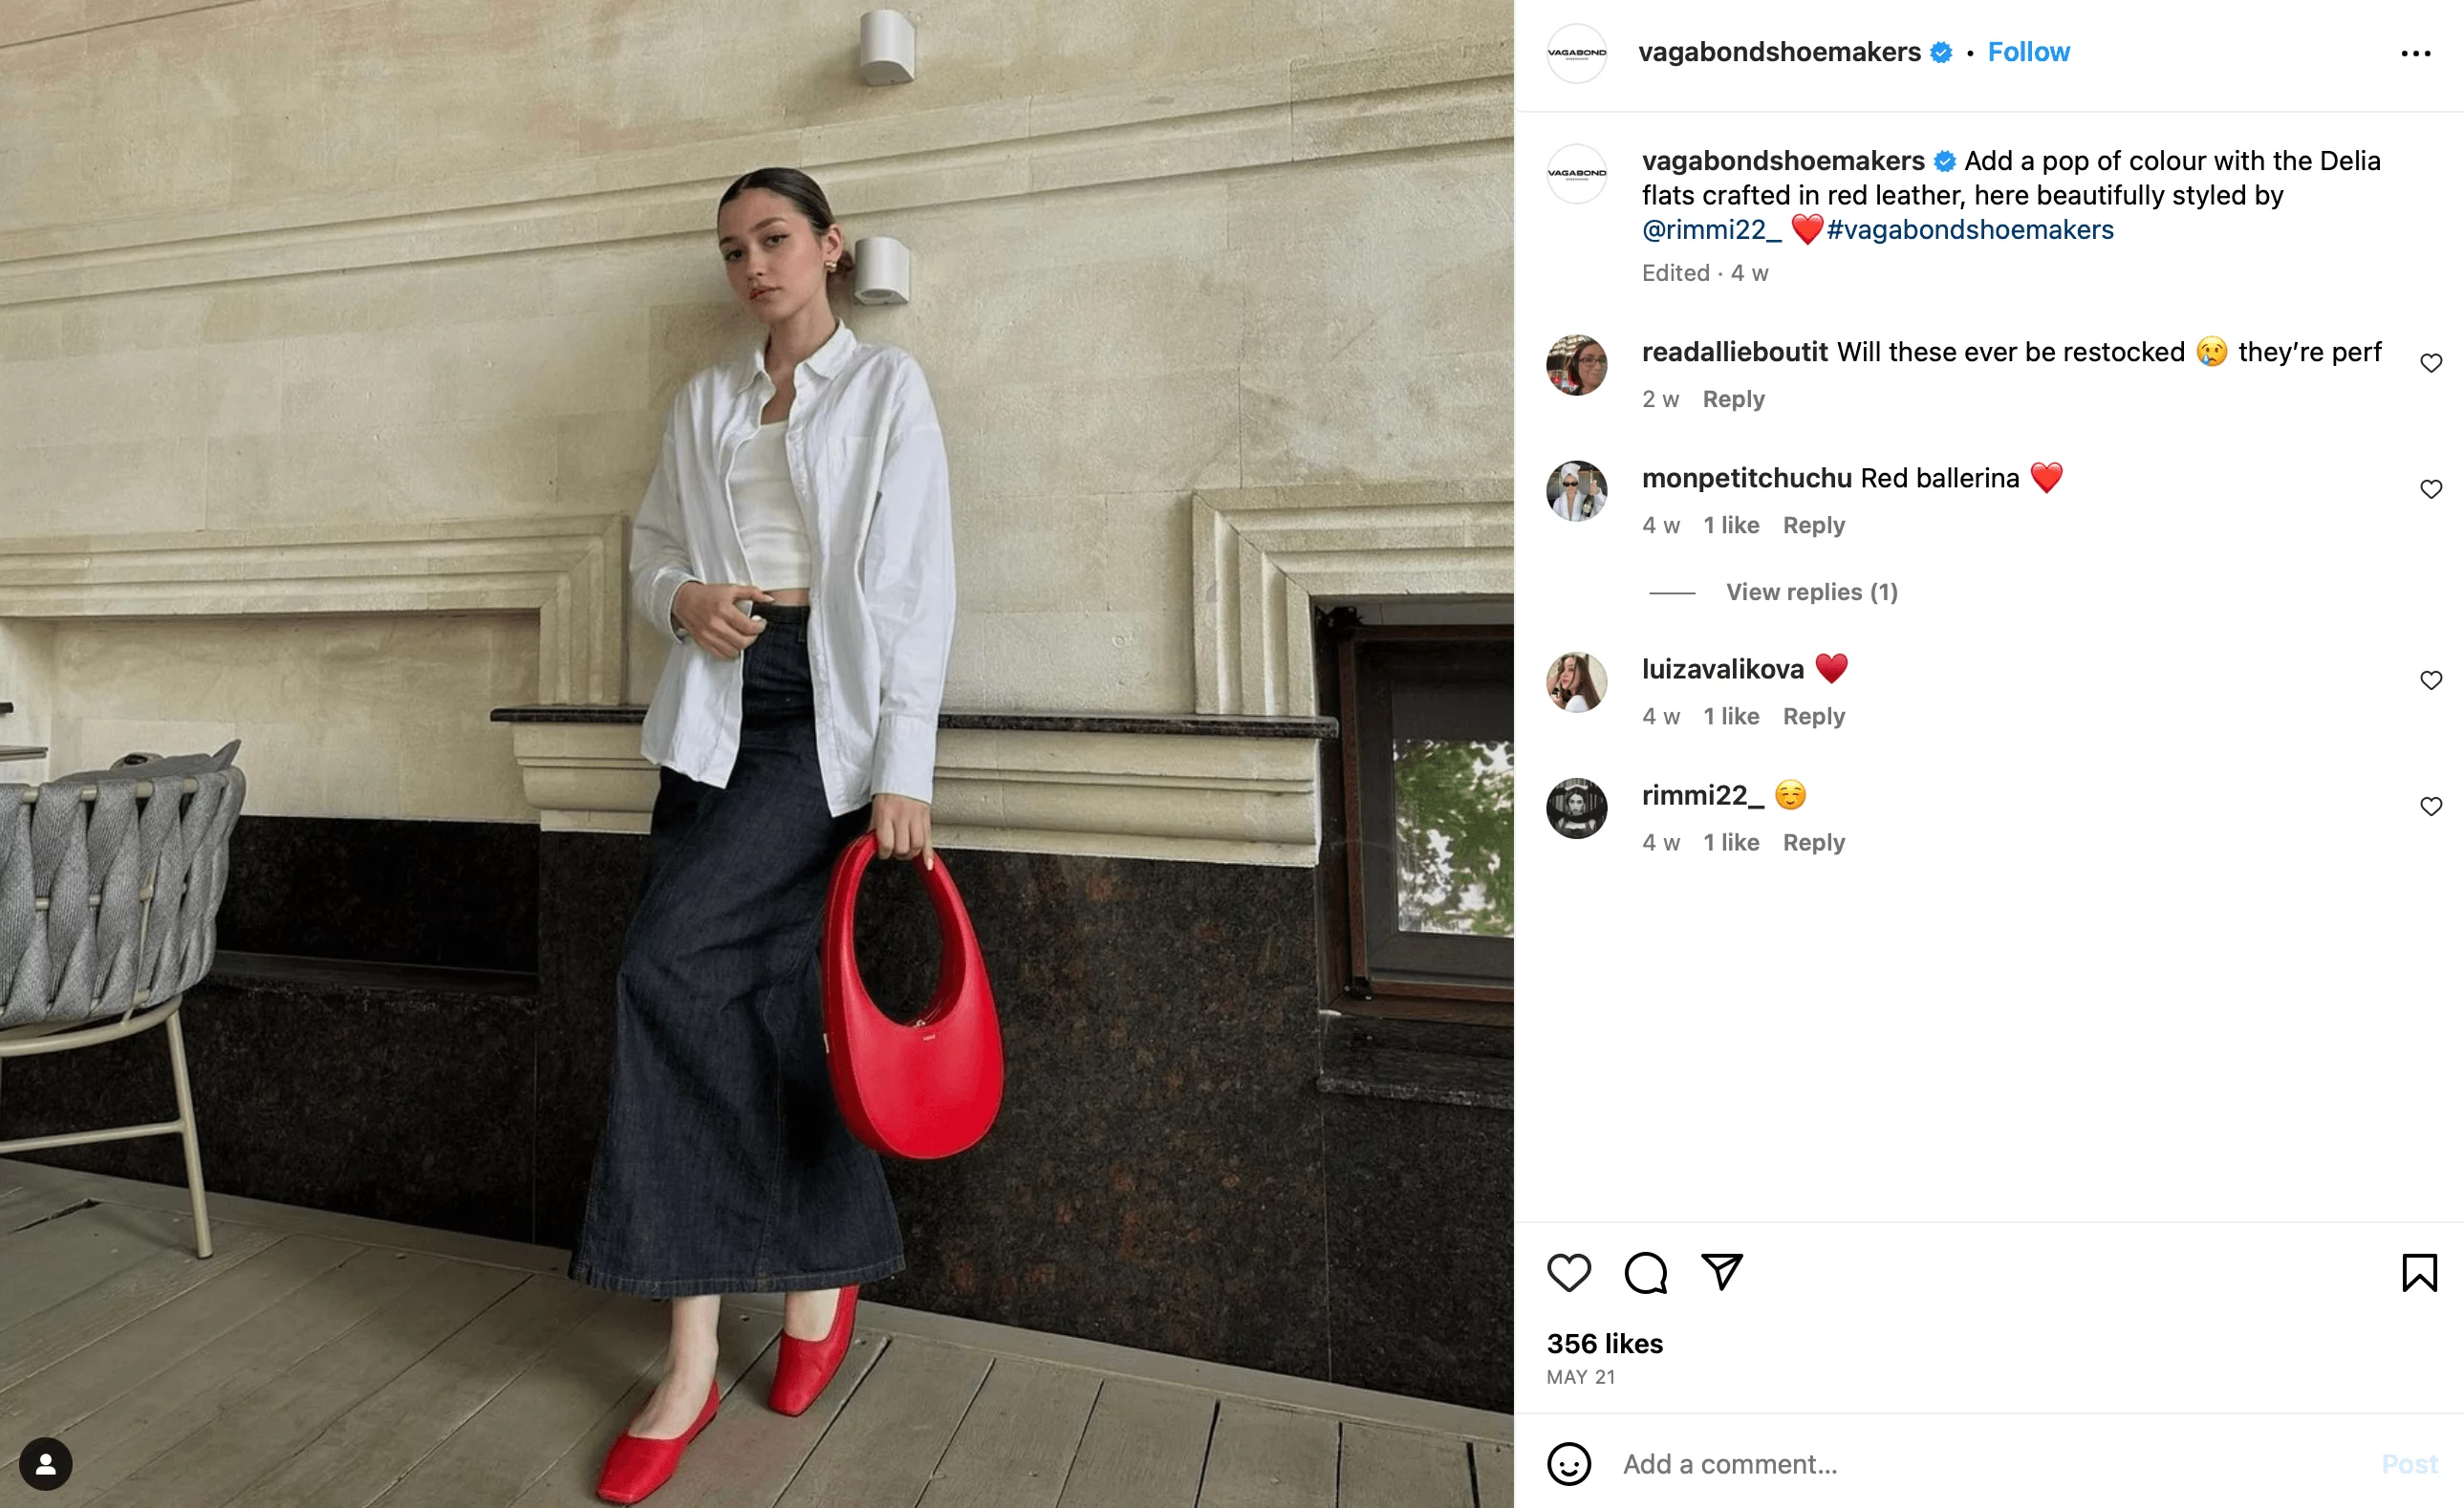 Instagram post showing the photo of a girl wearing red shoes matching a red purse, with neutrally coloured background and clothes.